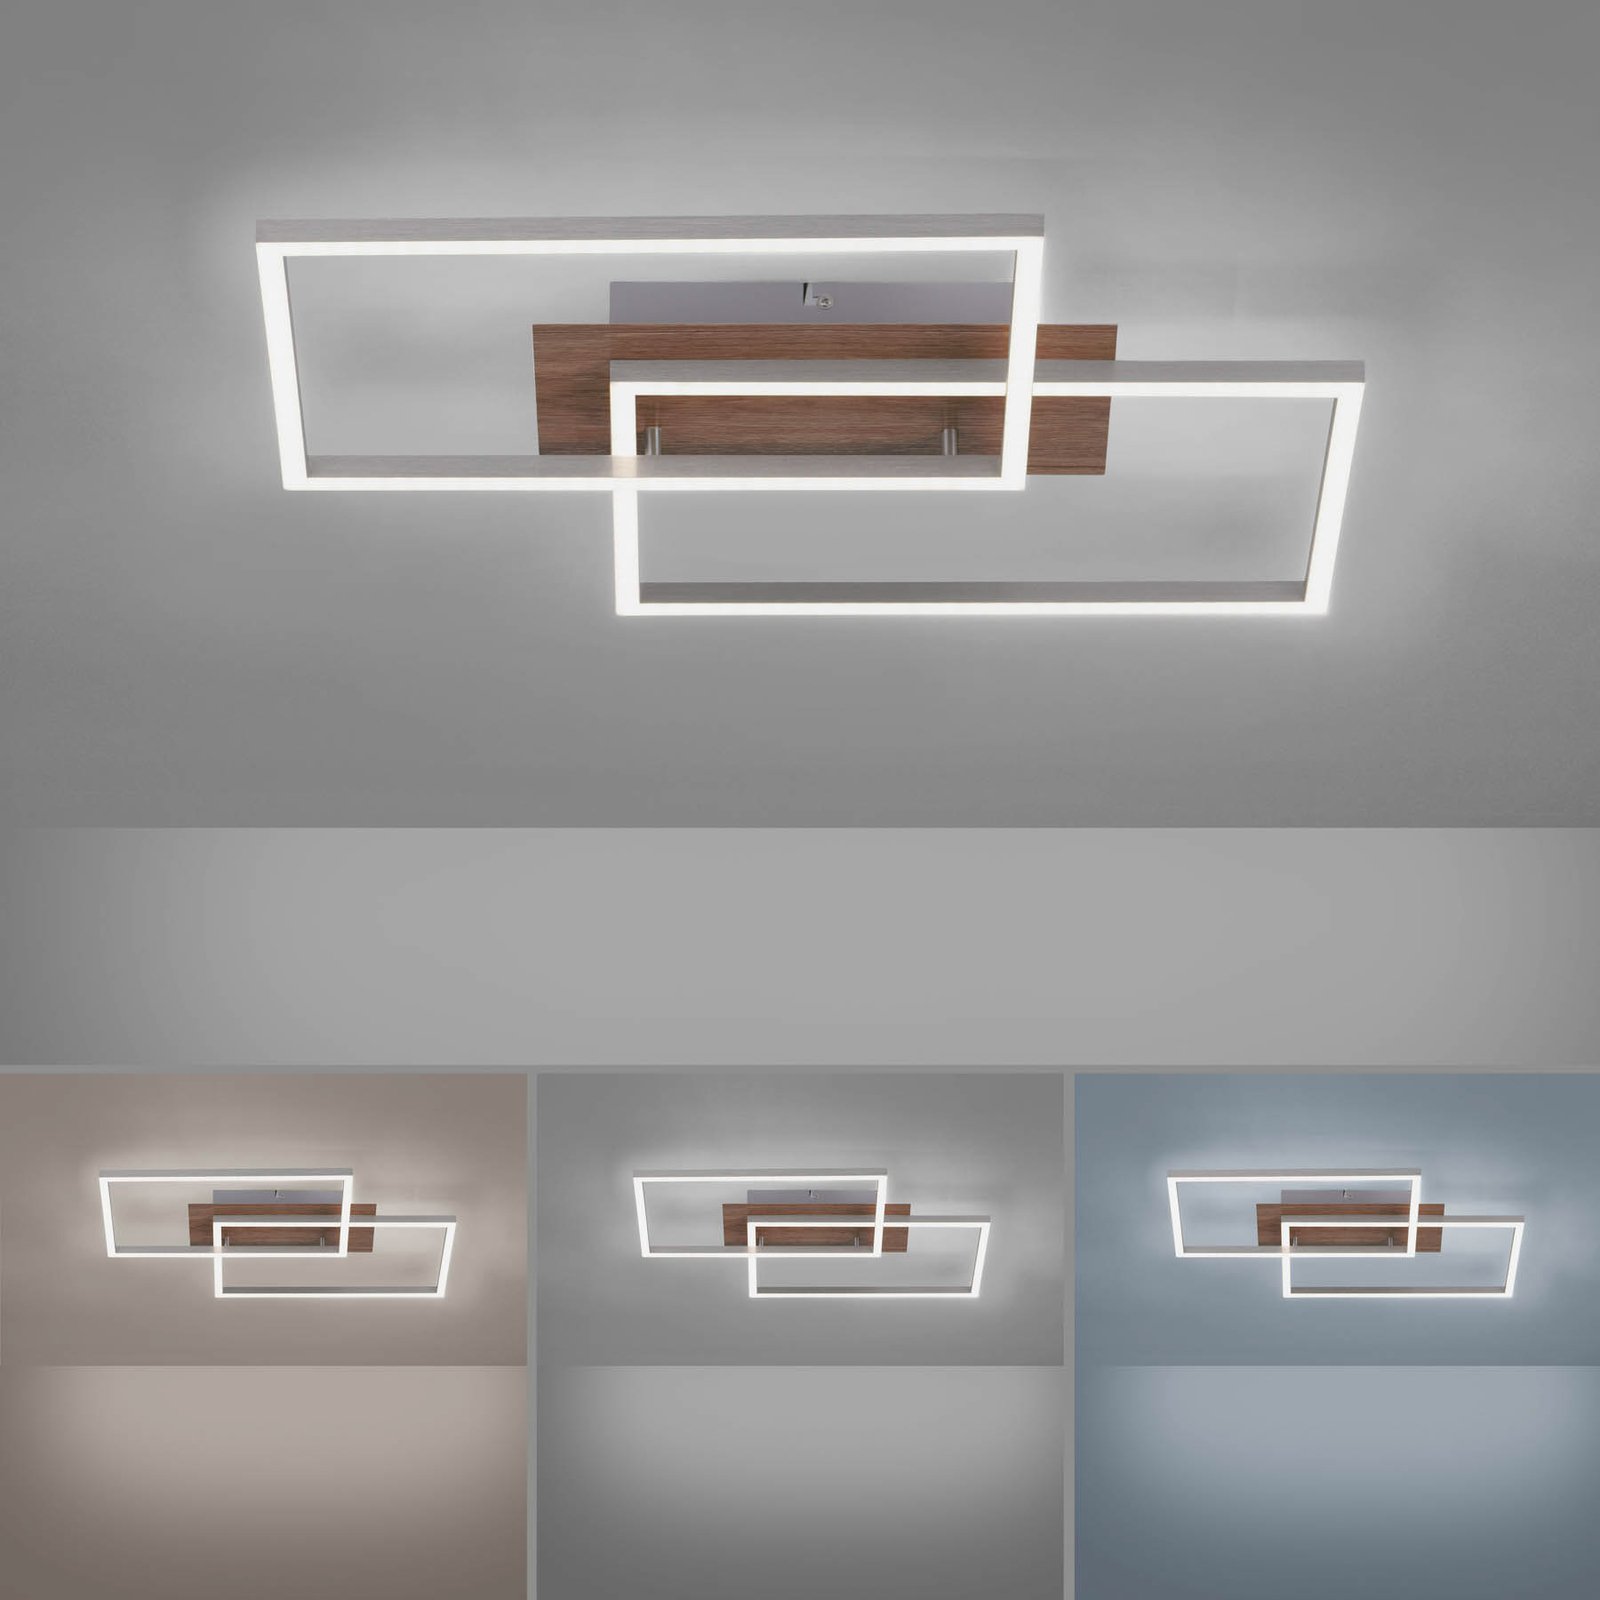 LED plafondlamp Iven, dim, staal/hout, 50,4x42cm